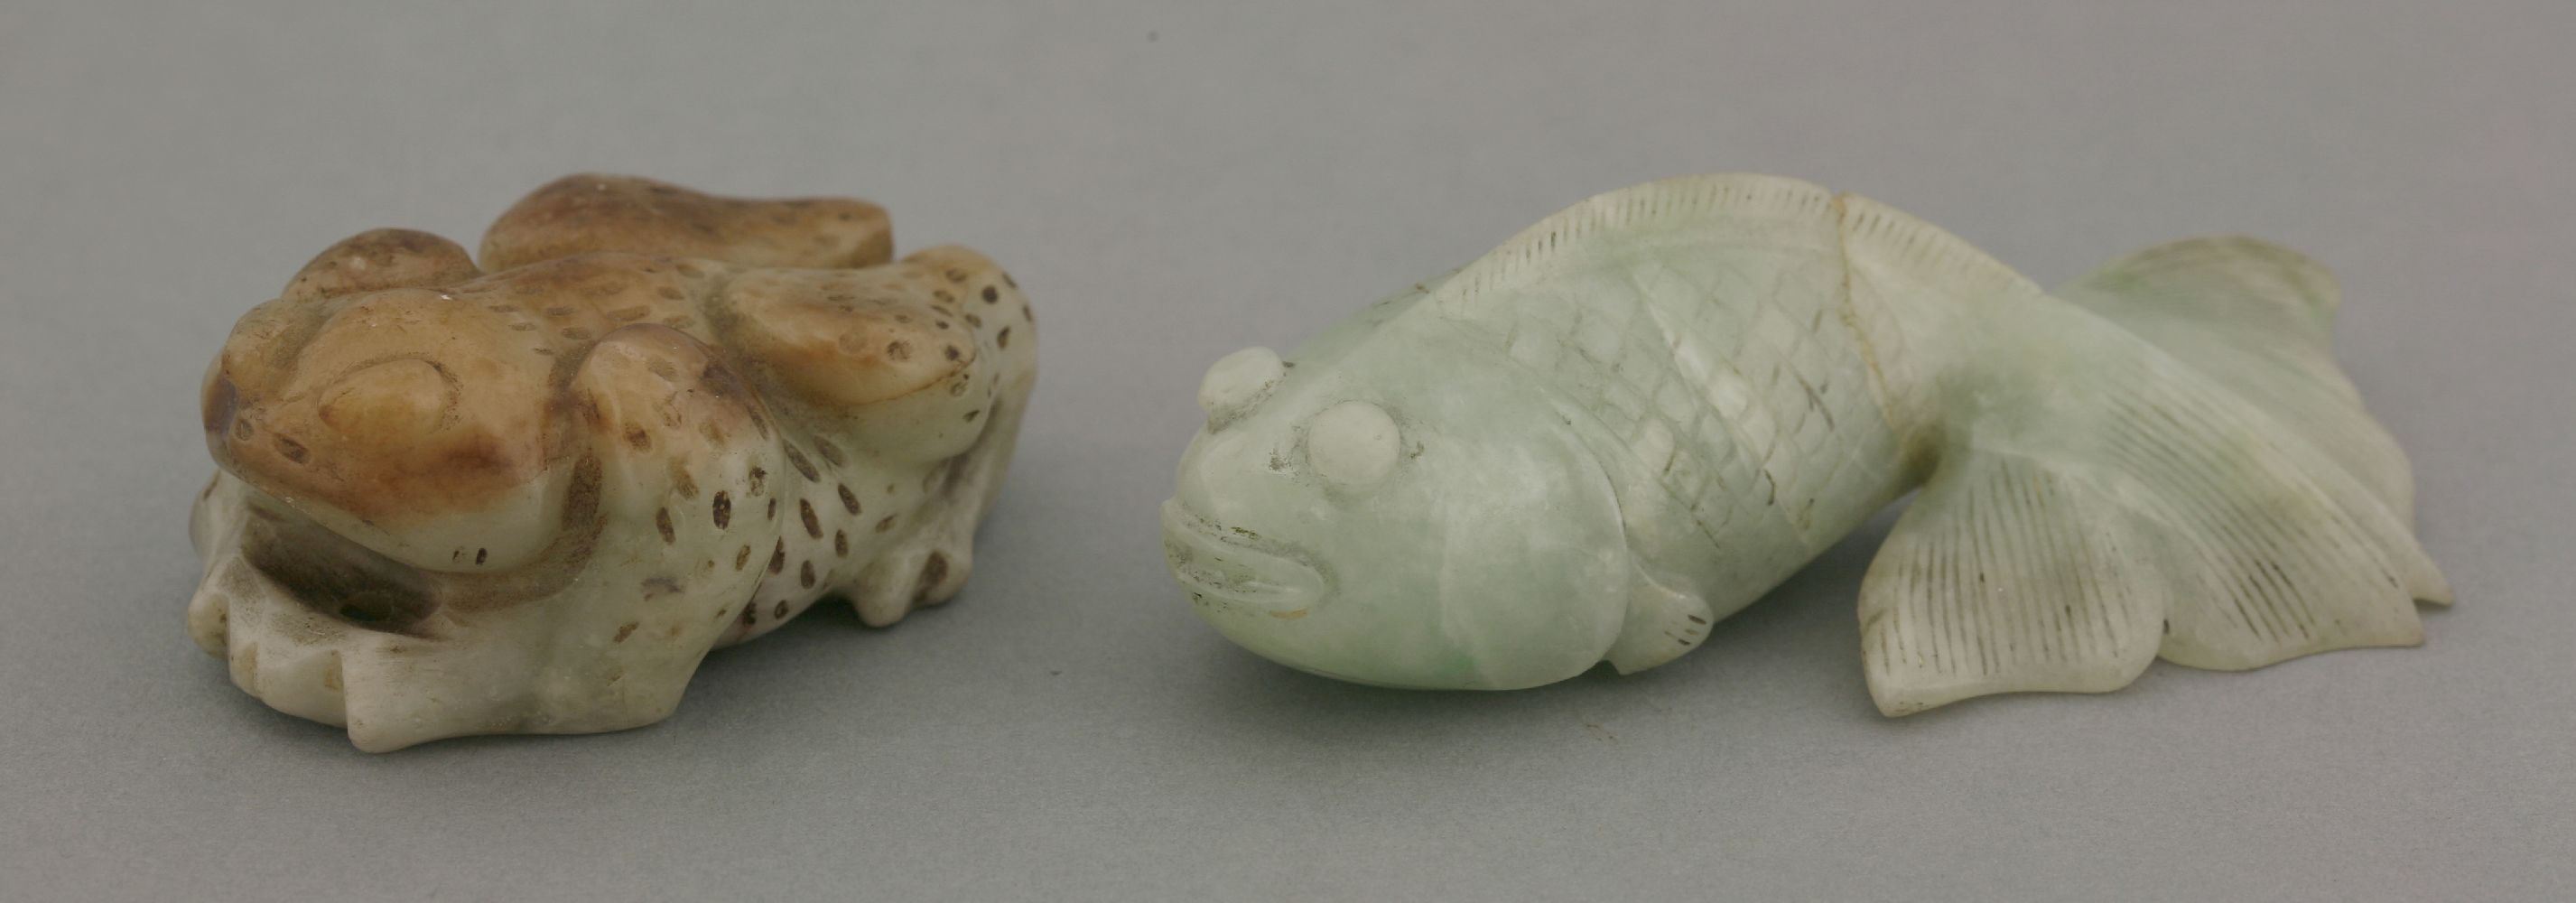 A jade toad, 20th century, with brown upper skin, pale green beneath and flecked overall, 5.5cm,